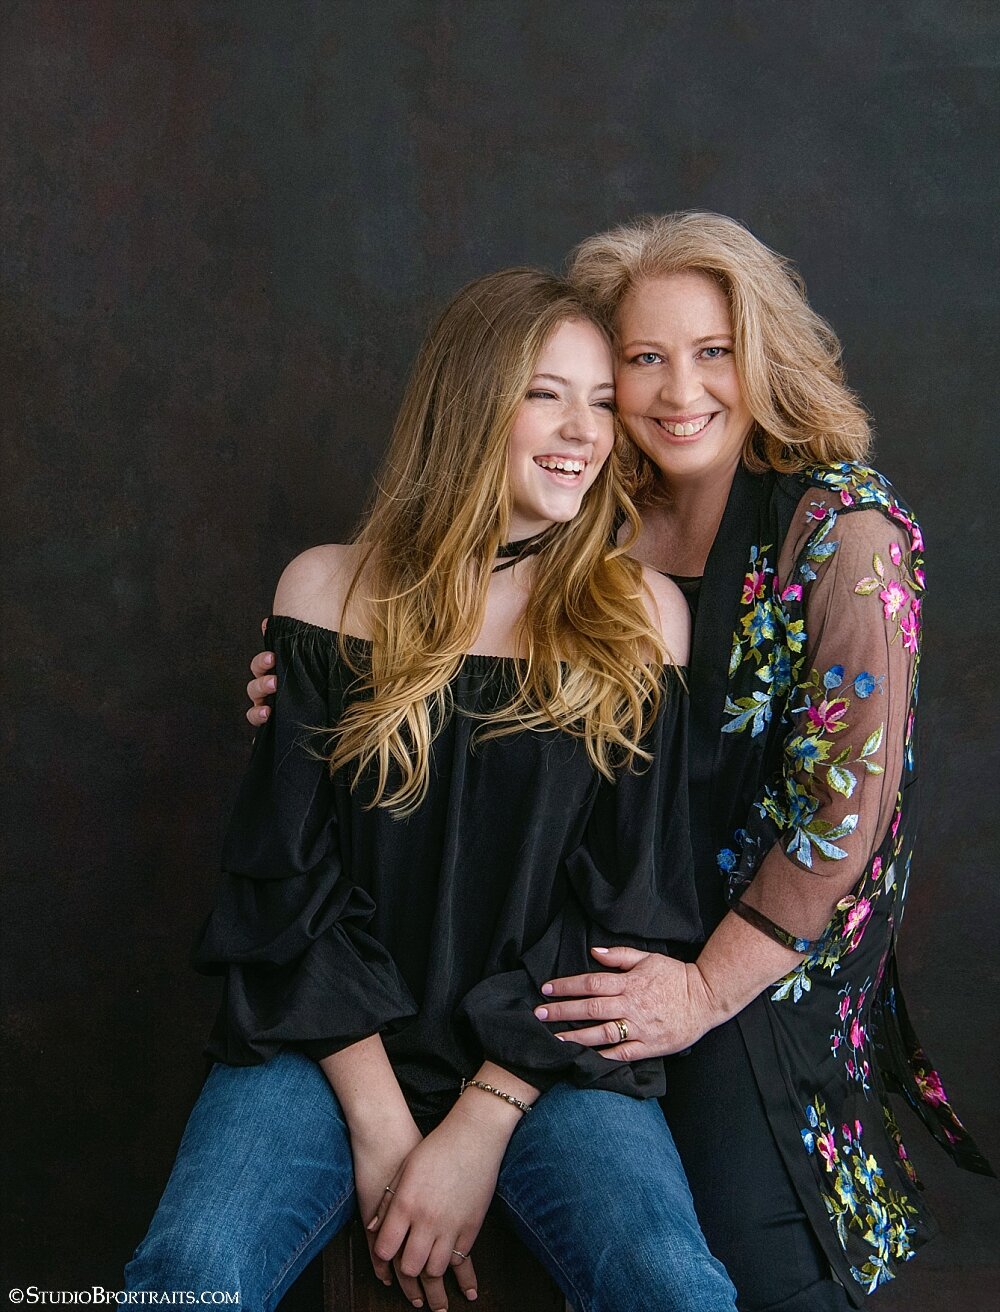 Mother Daughter Same Outfits Posing On Stock Photo 300479018 | Shutterstock